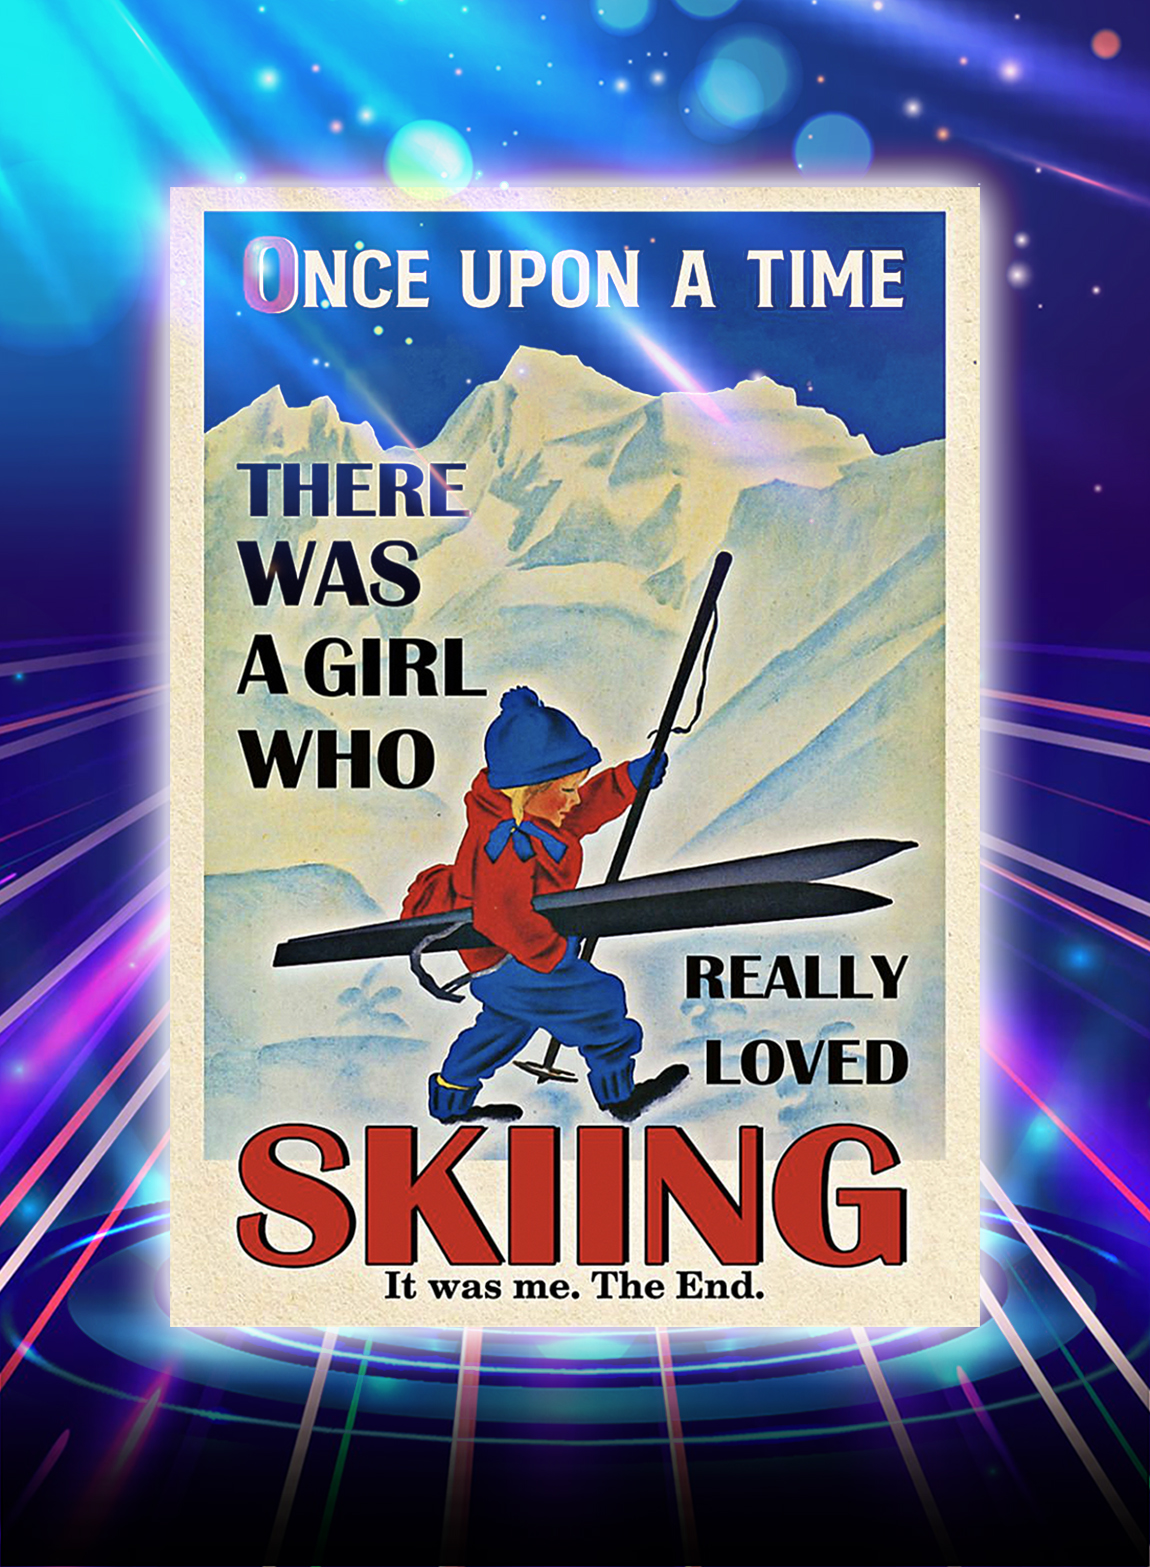 Once upon a time there was a girl who really loved skiing poster - A3